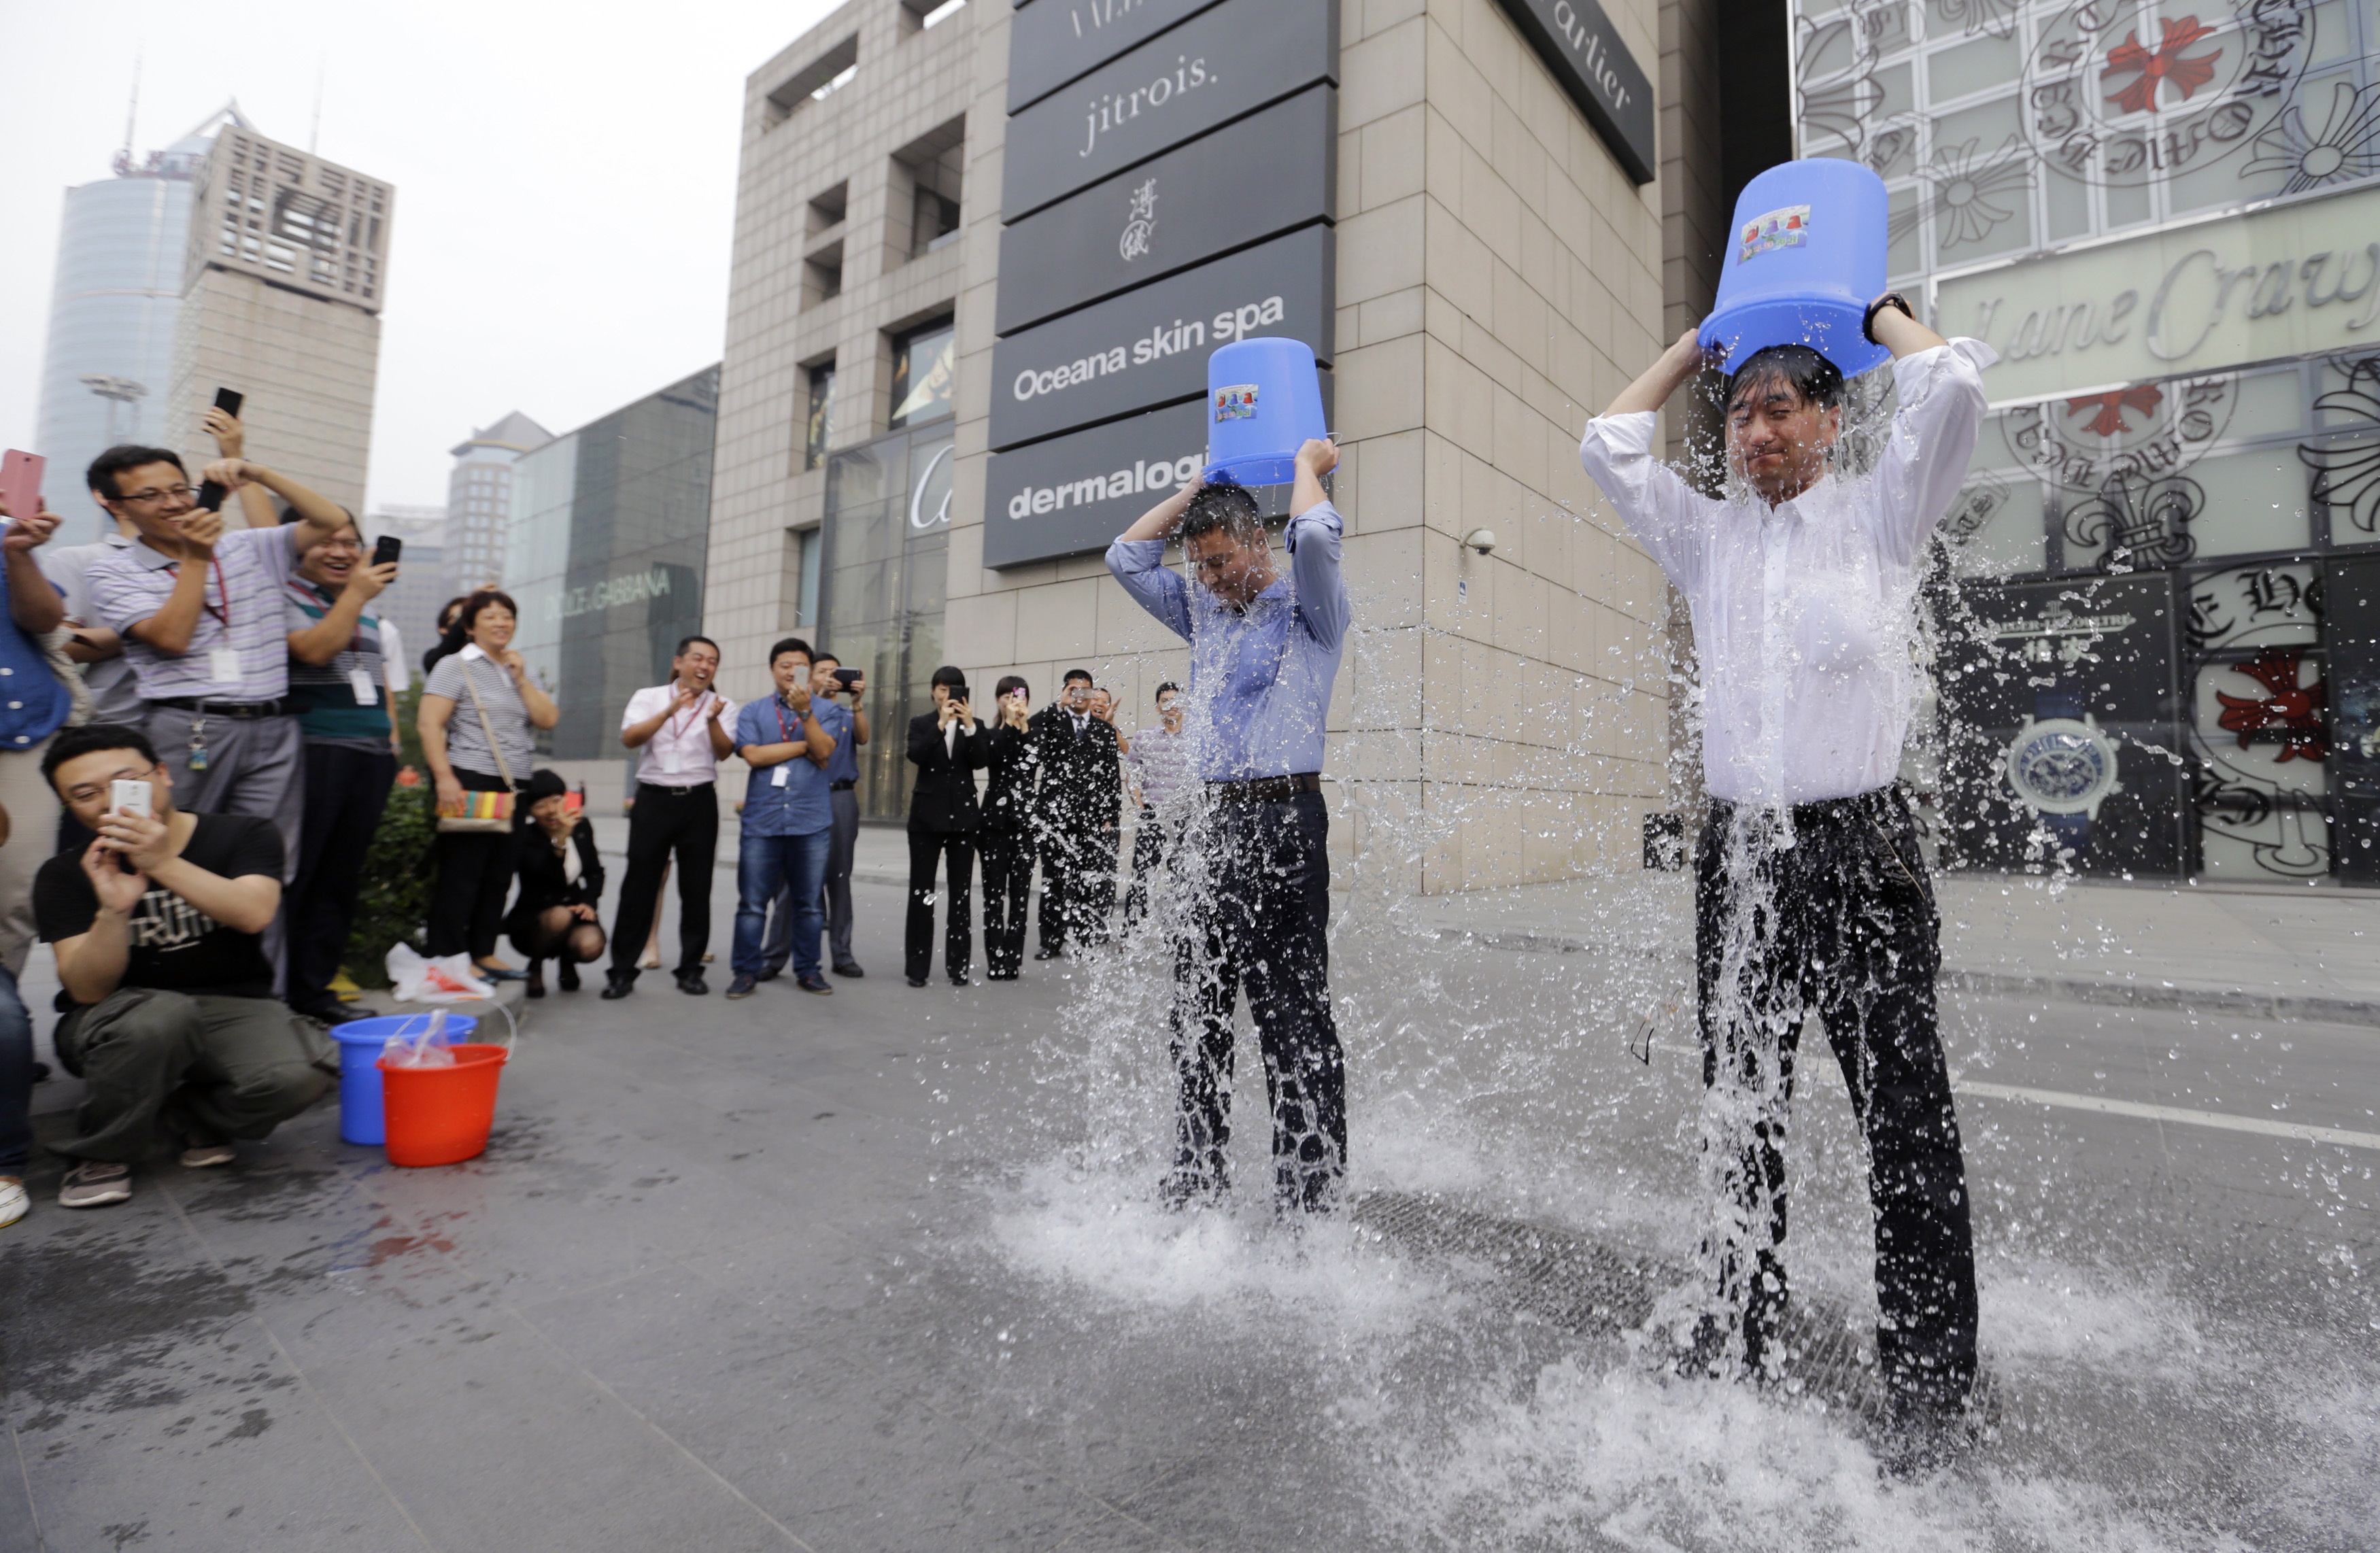 The viral "Ice Bucket Challenge" is all over the tech sphere in China. Photo: Reuters